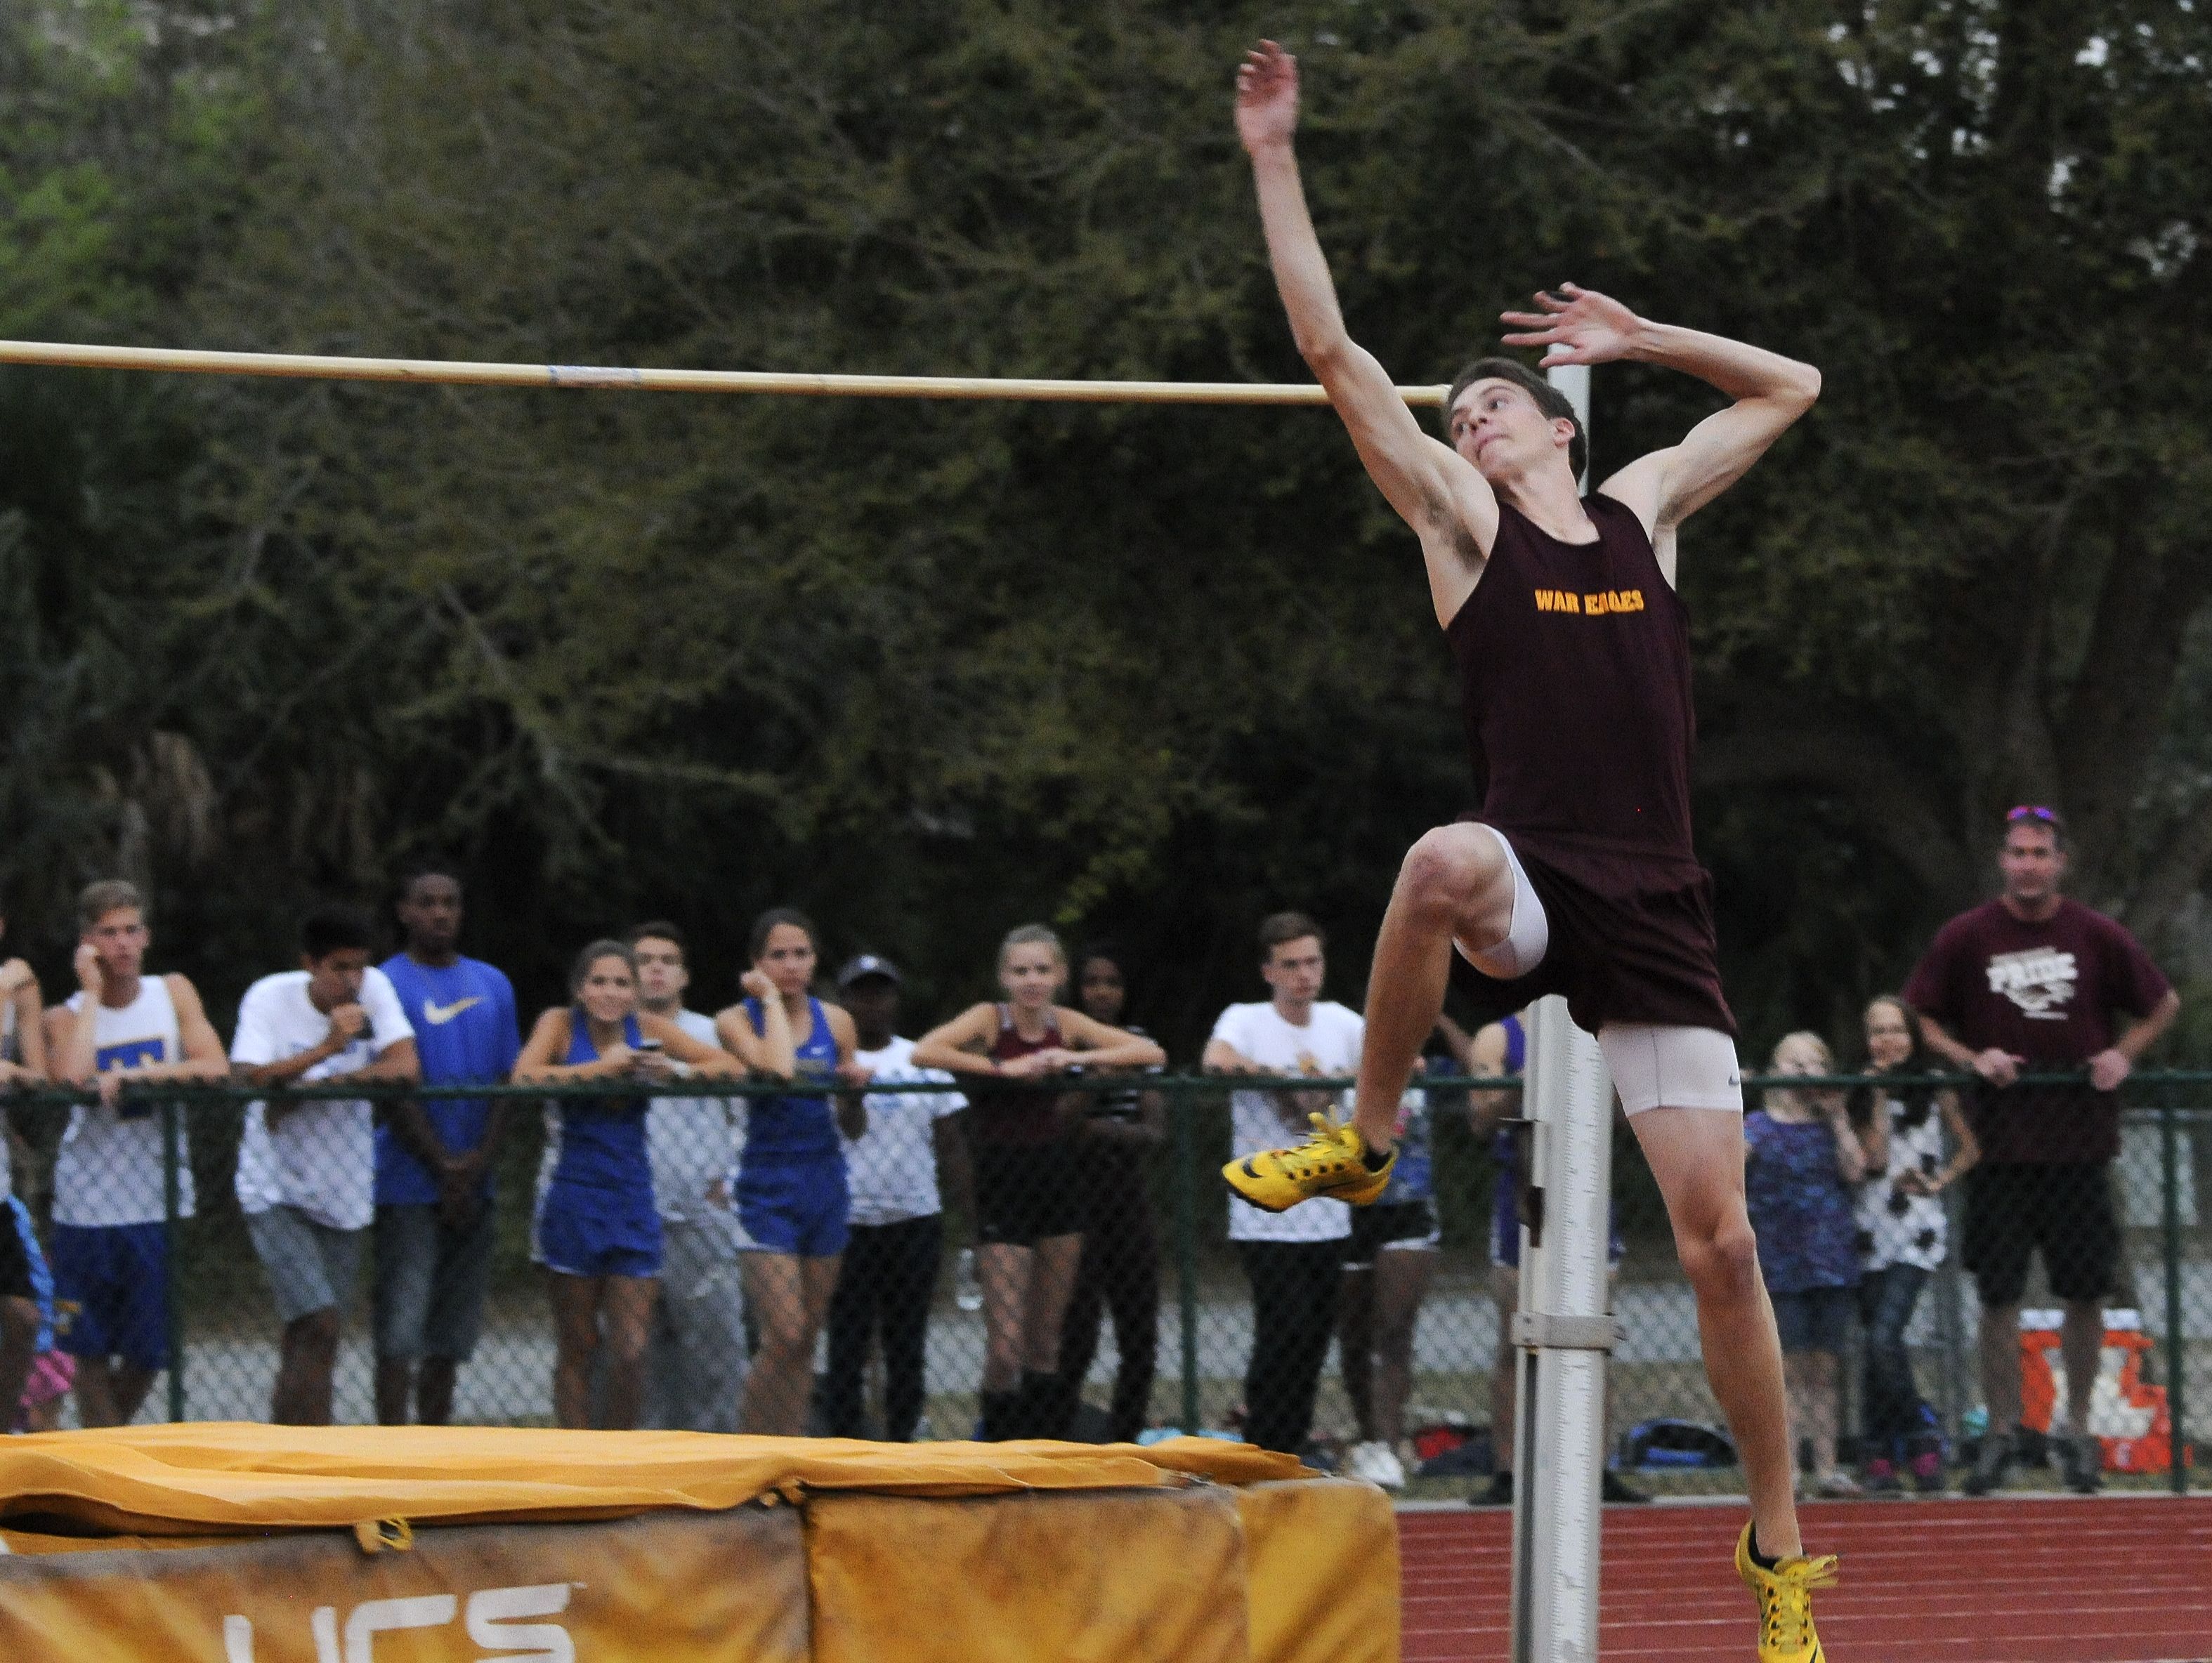 Tristan Schultheis clears the bar during the Astronaut Invitational Track and Field meet in Titusville.